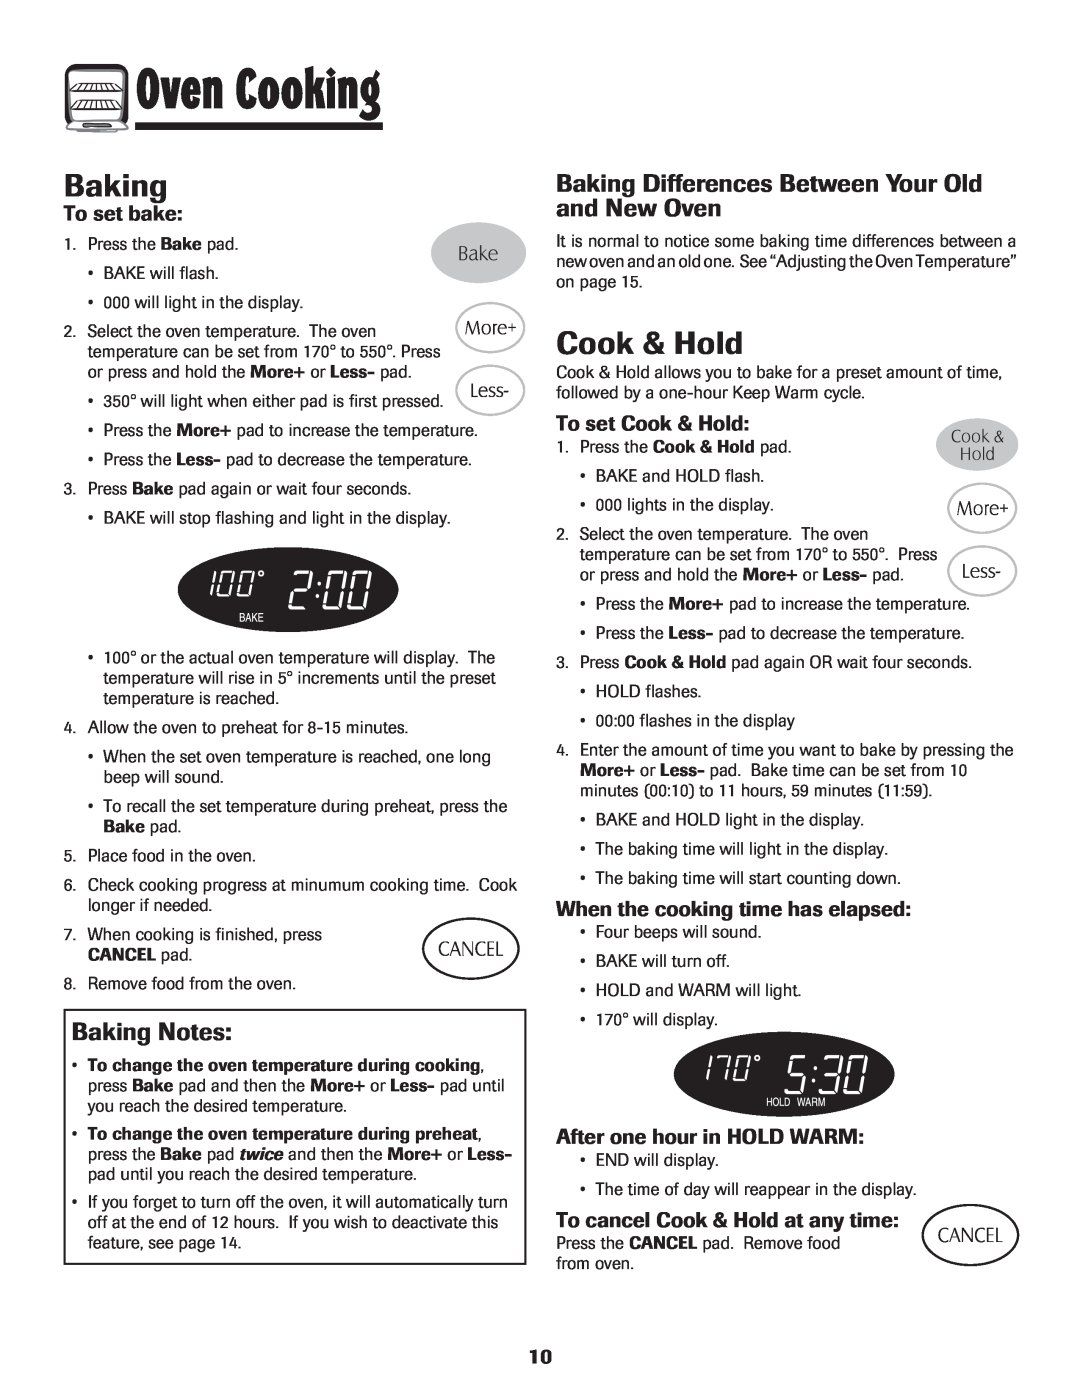 Maytag 700 Cook & Hold, Baking Notes, Baking Differences Between Your Old and New Oven, To set bake, Oven Cooking 